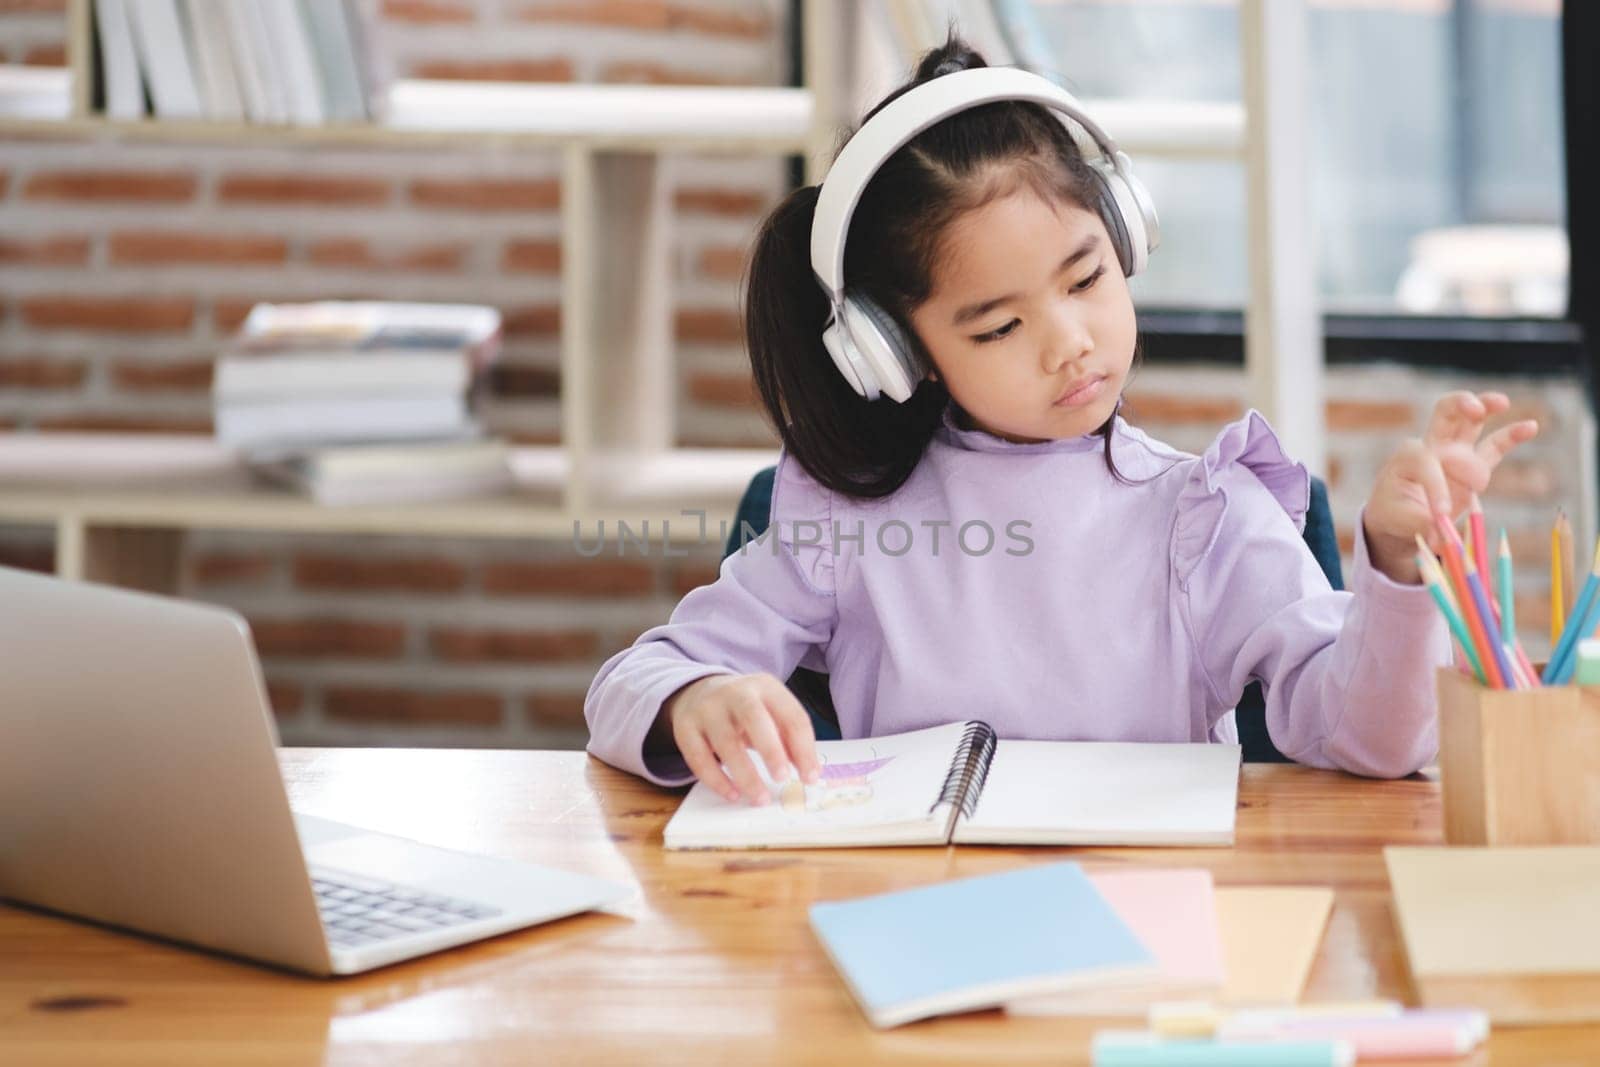 A young girl is sitting at a desk with a laptop and a notebook. She is wearing headphones and she is focused on her work